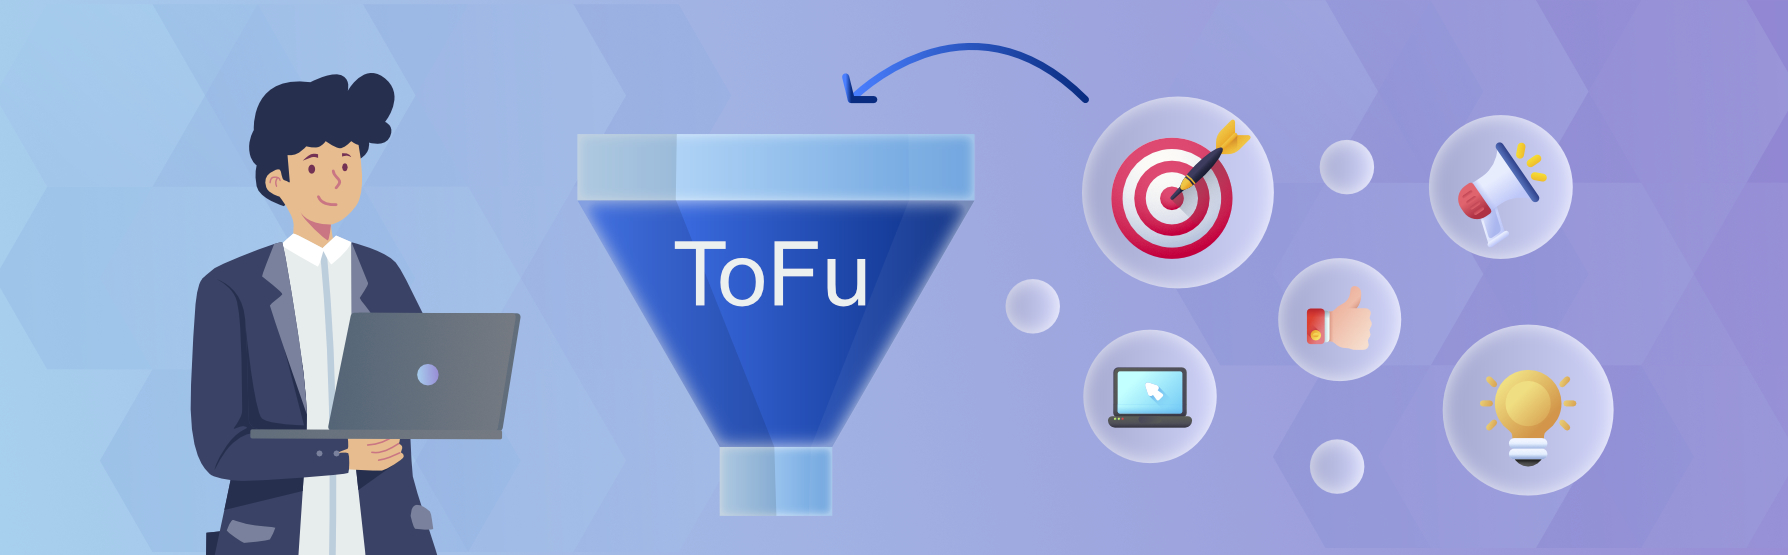 Top of Funnel Marketing For SaaS: Strategies, Measurement, and Examples